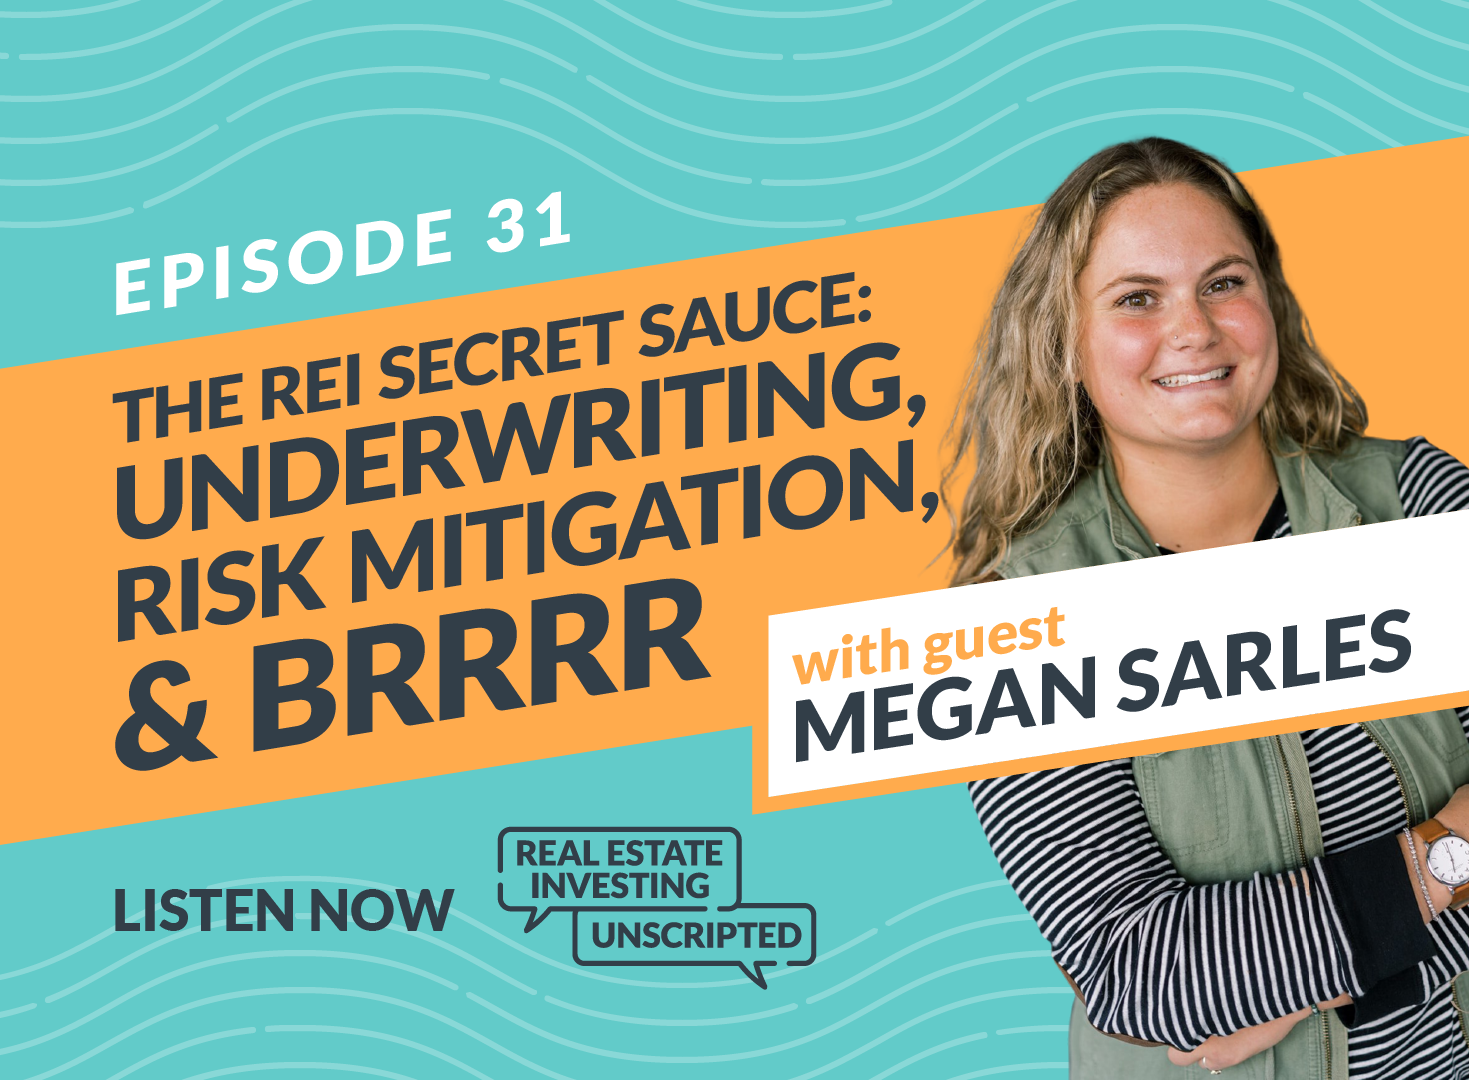 Megan Sarles stops by to talk about how deals are underwritten, mitigating risk, the BRRRR strategy, and more.